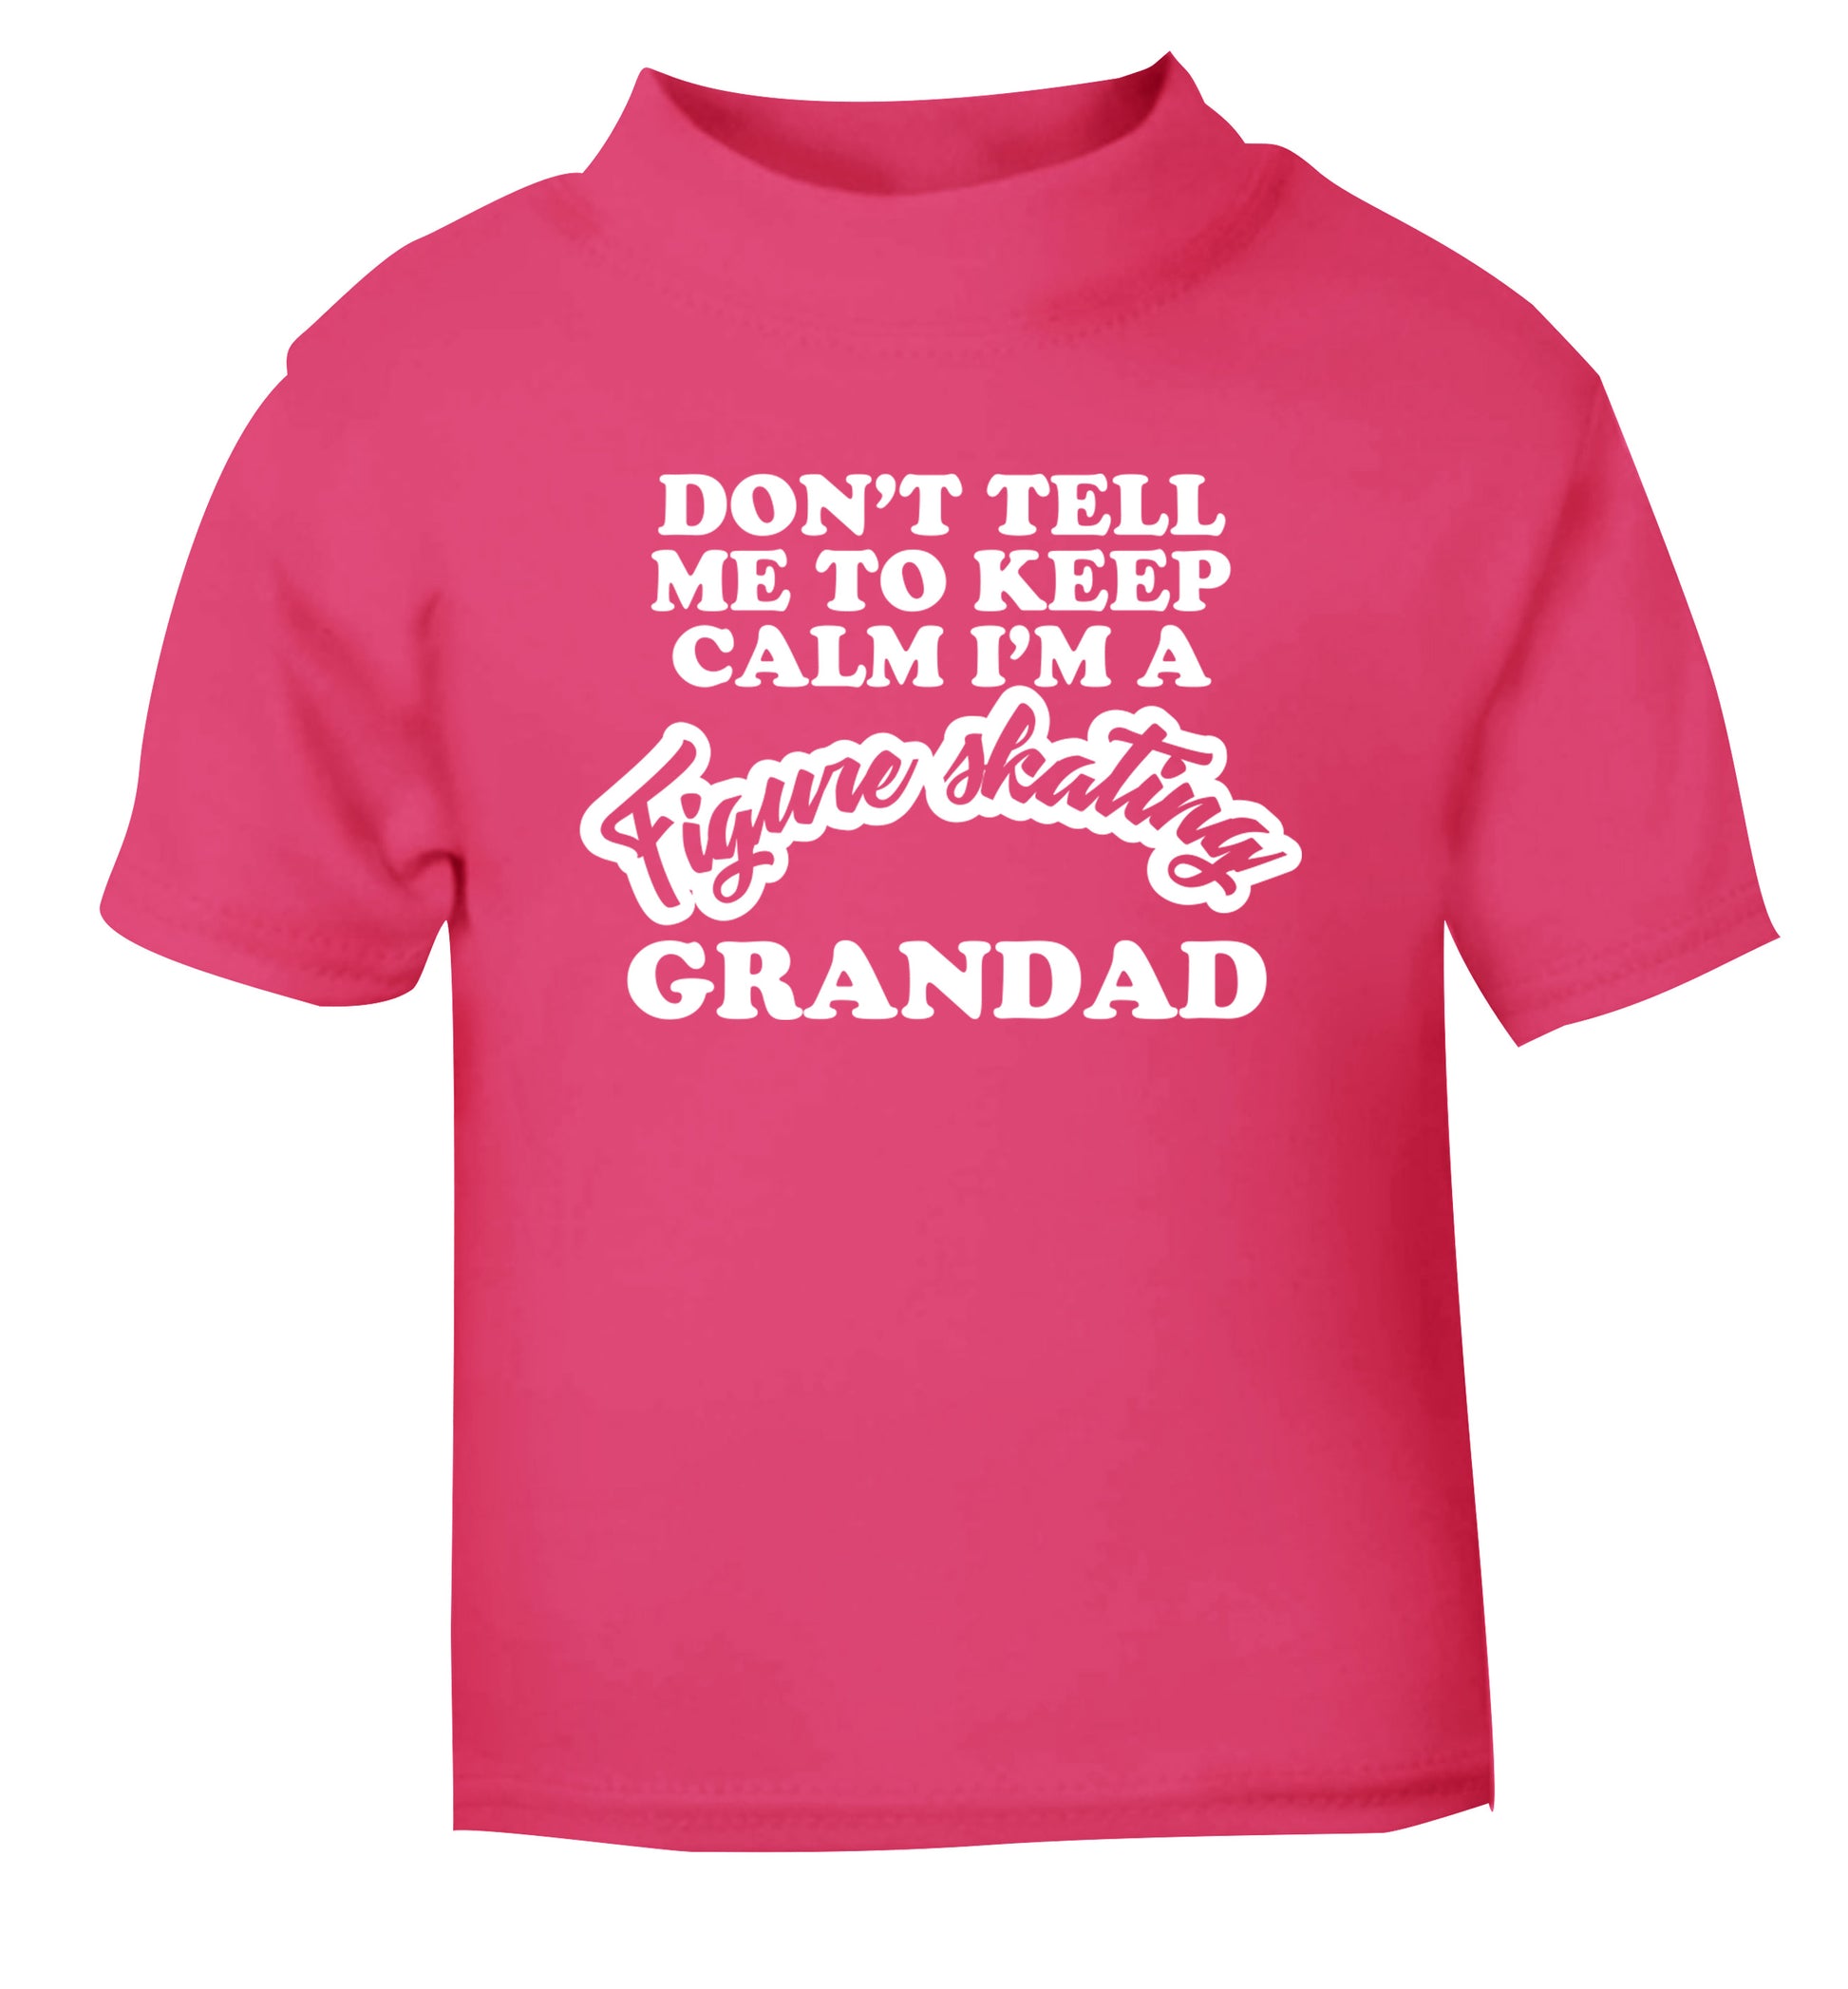 Don't tell me to keep calm I'm a figure skating grandad pink Baby Toddler Tshirt 2 Years